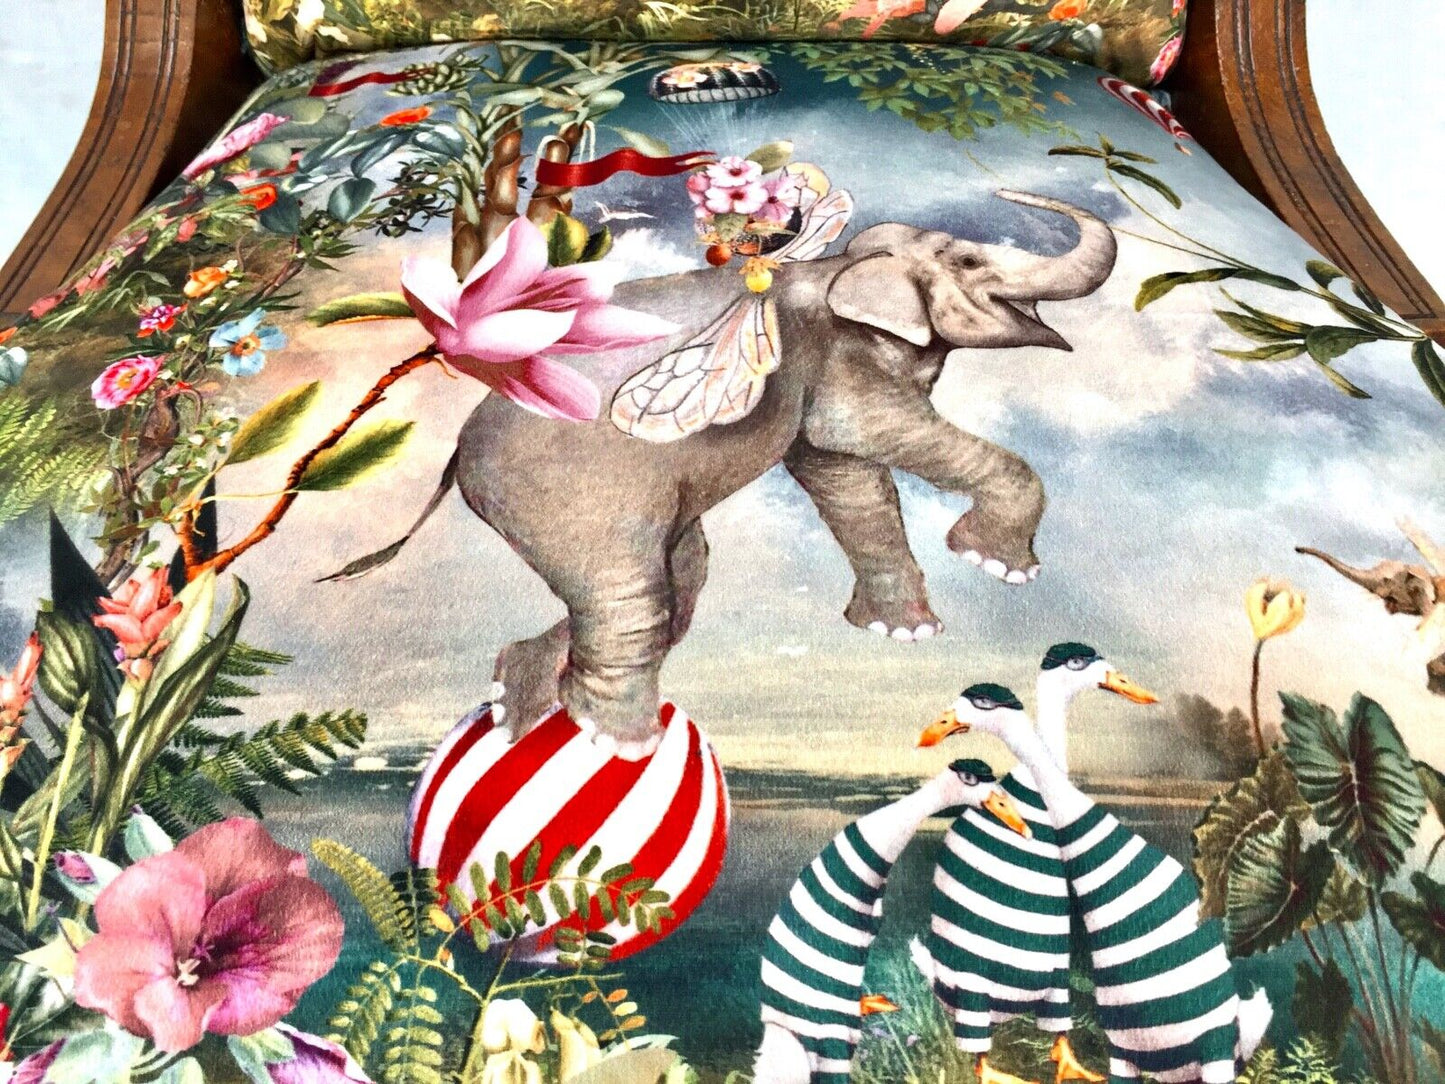 Antique Wooden Oak Bedroom / Hall Chair with Elephant Circus Fabric / Edwardian